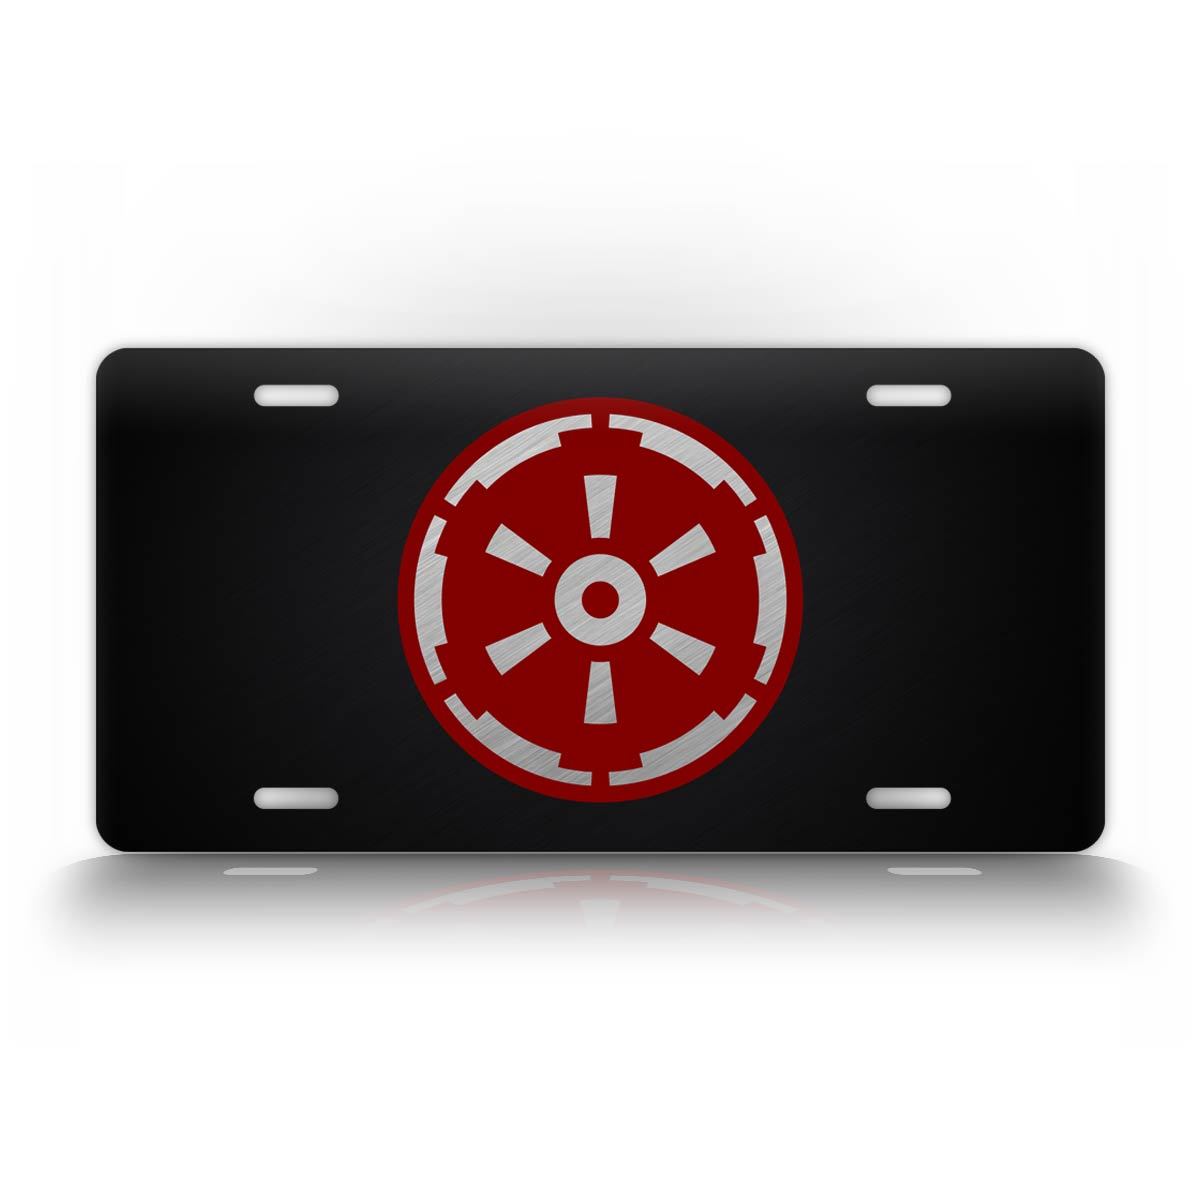 Red Star Wars Emblem Seal Galatic Imperial License Plate 